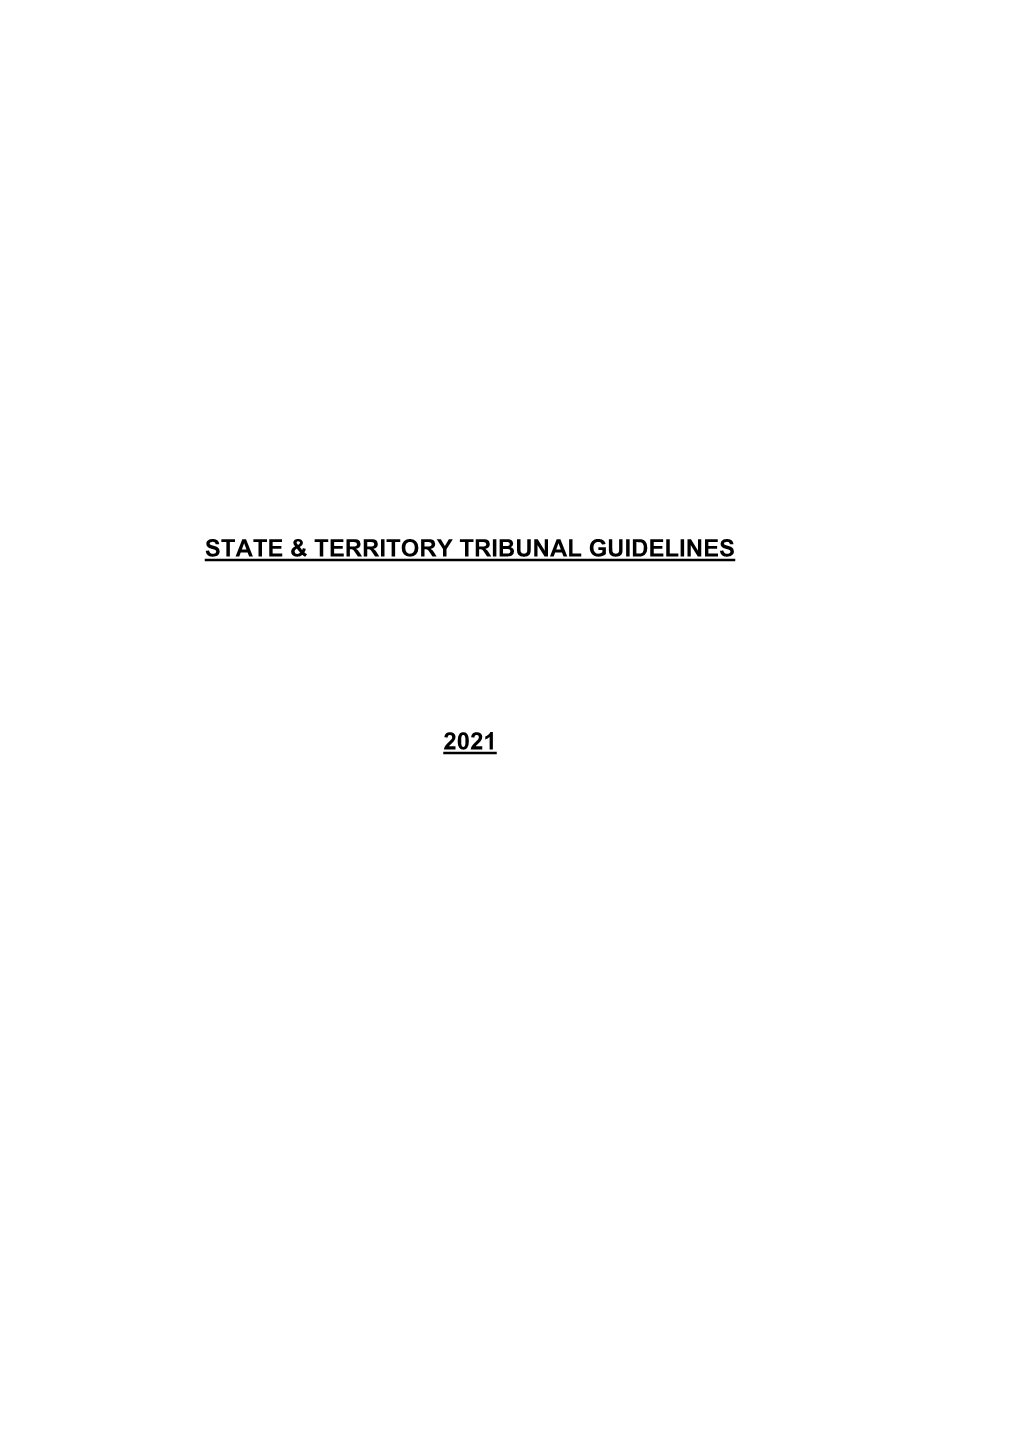 State & Territory Tribunal Guidelines 2021